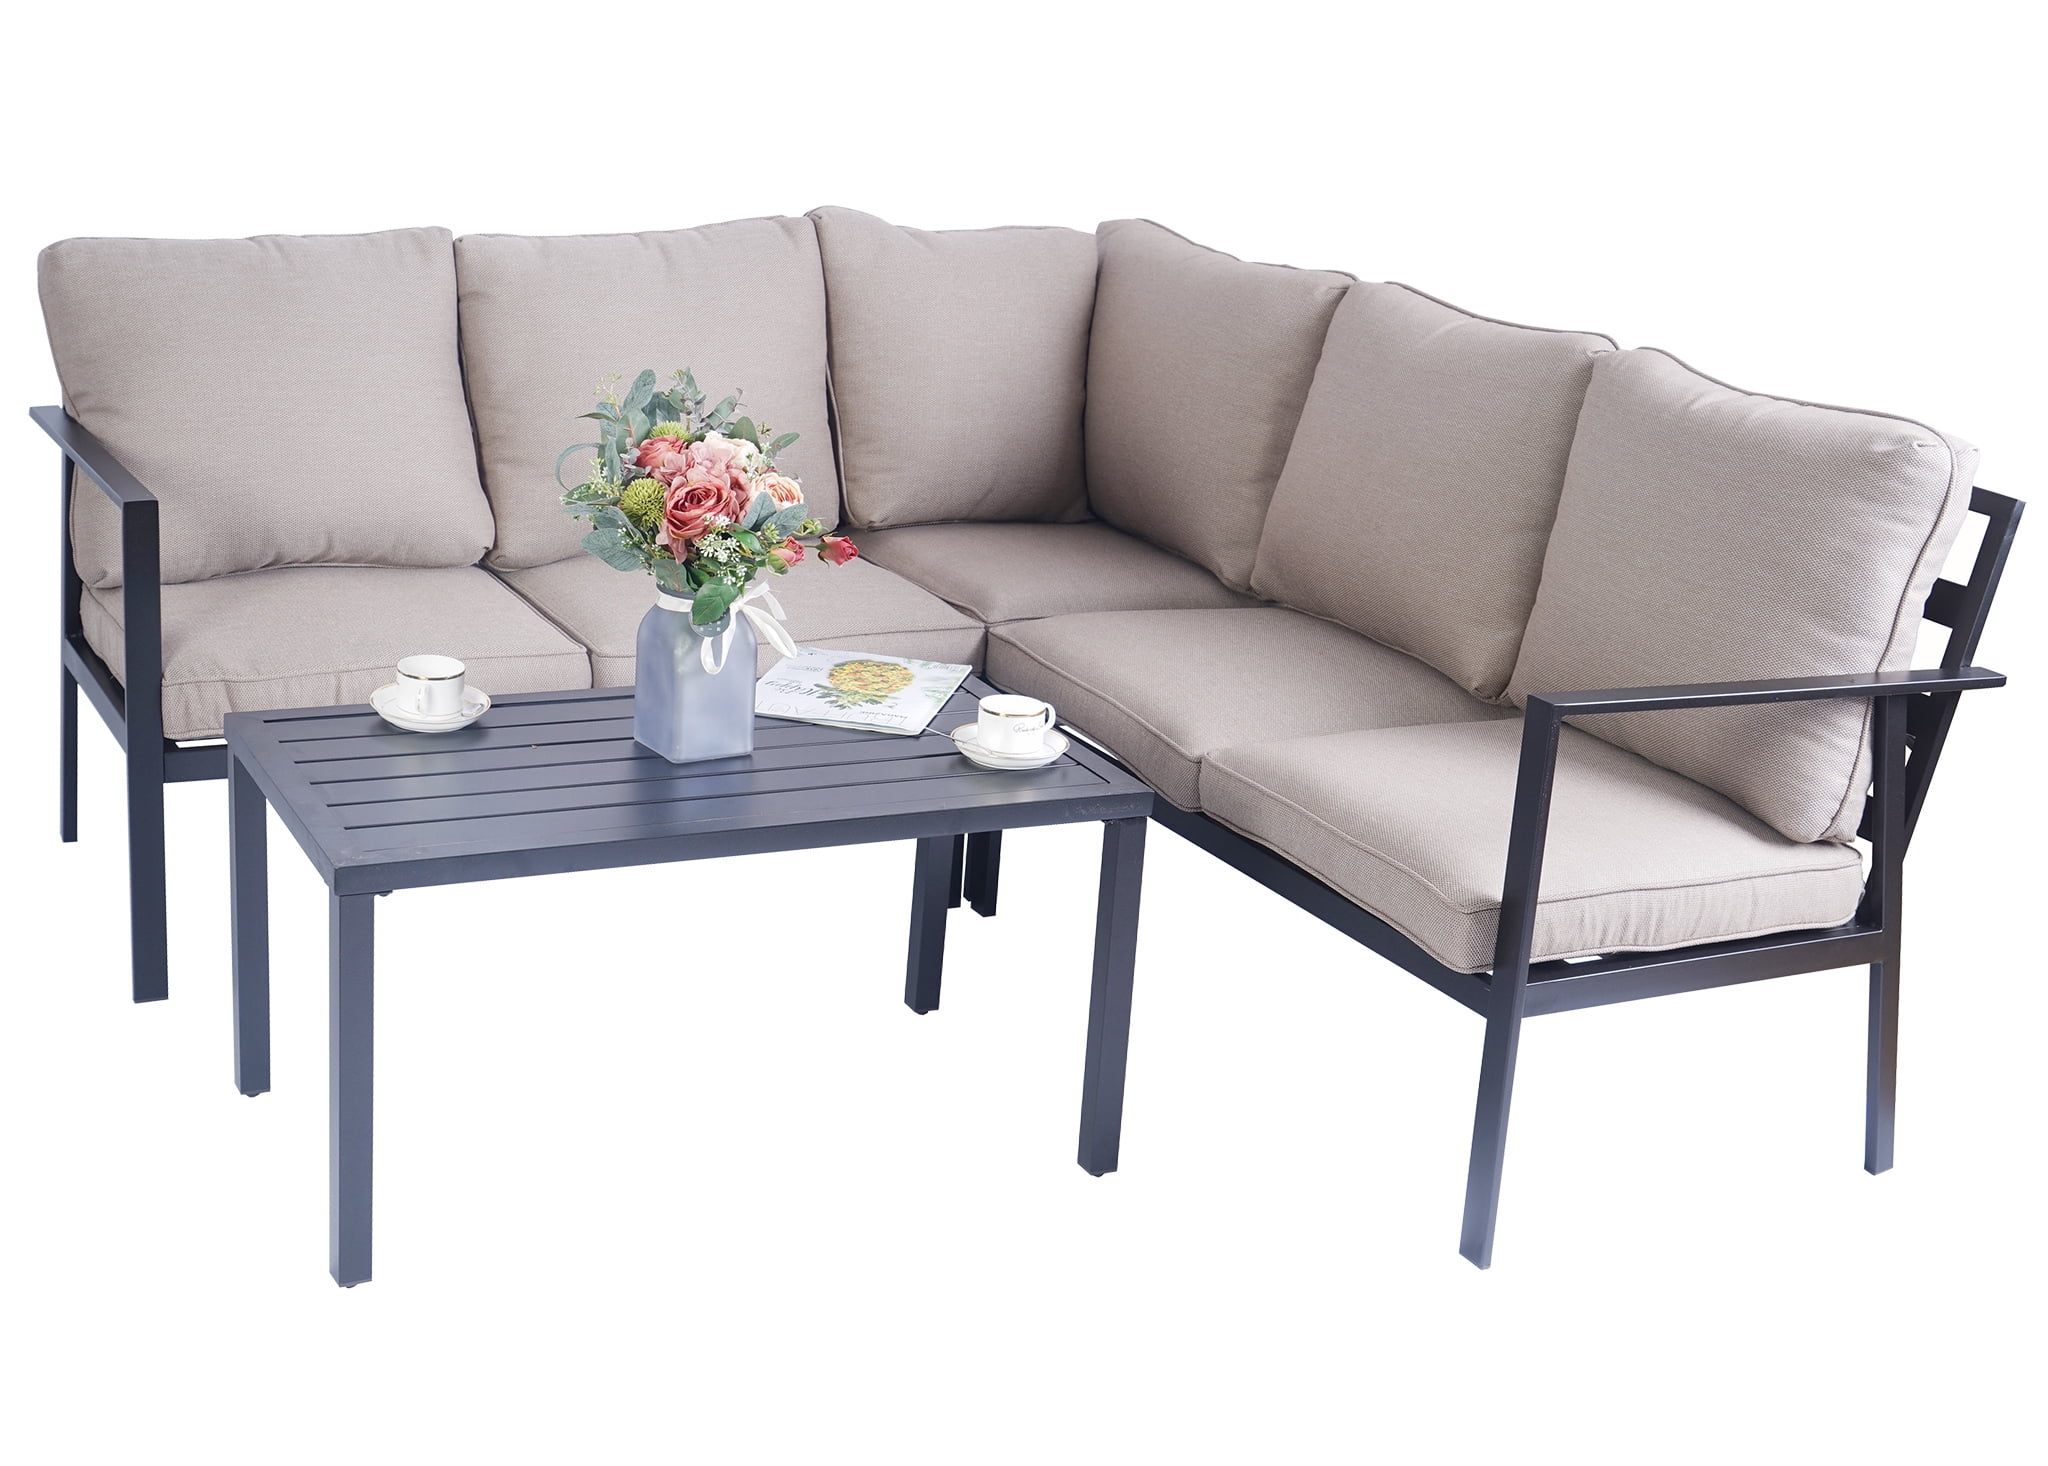 Kozyard 4 Outdoor Set with Strong Metal Frame and Comfortable Cushions (Beige) Walmart.com